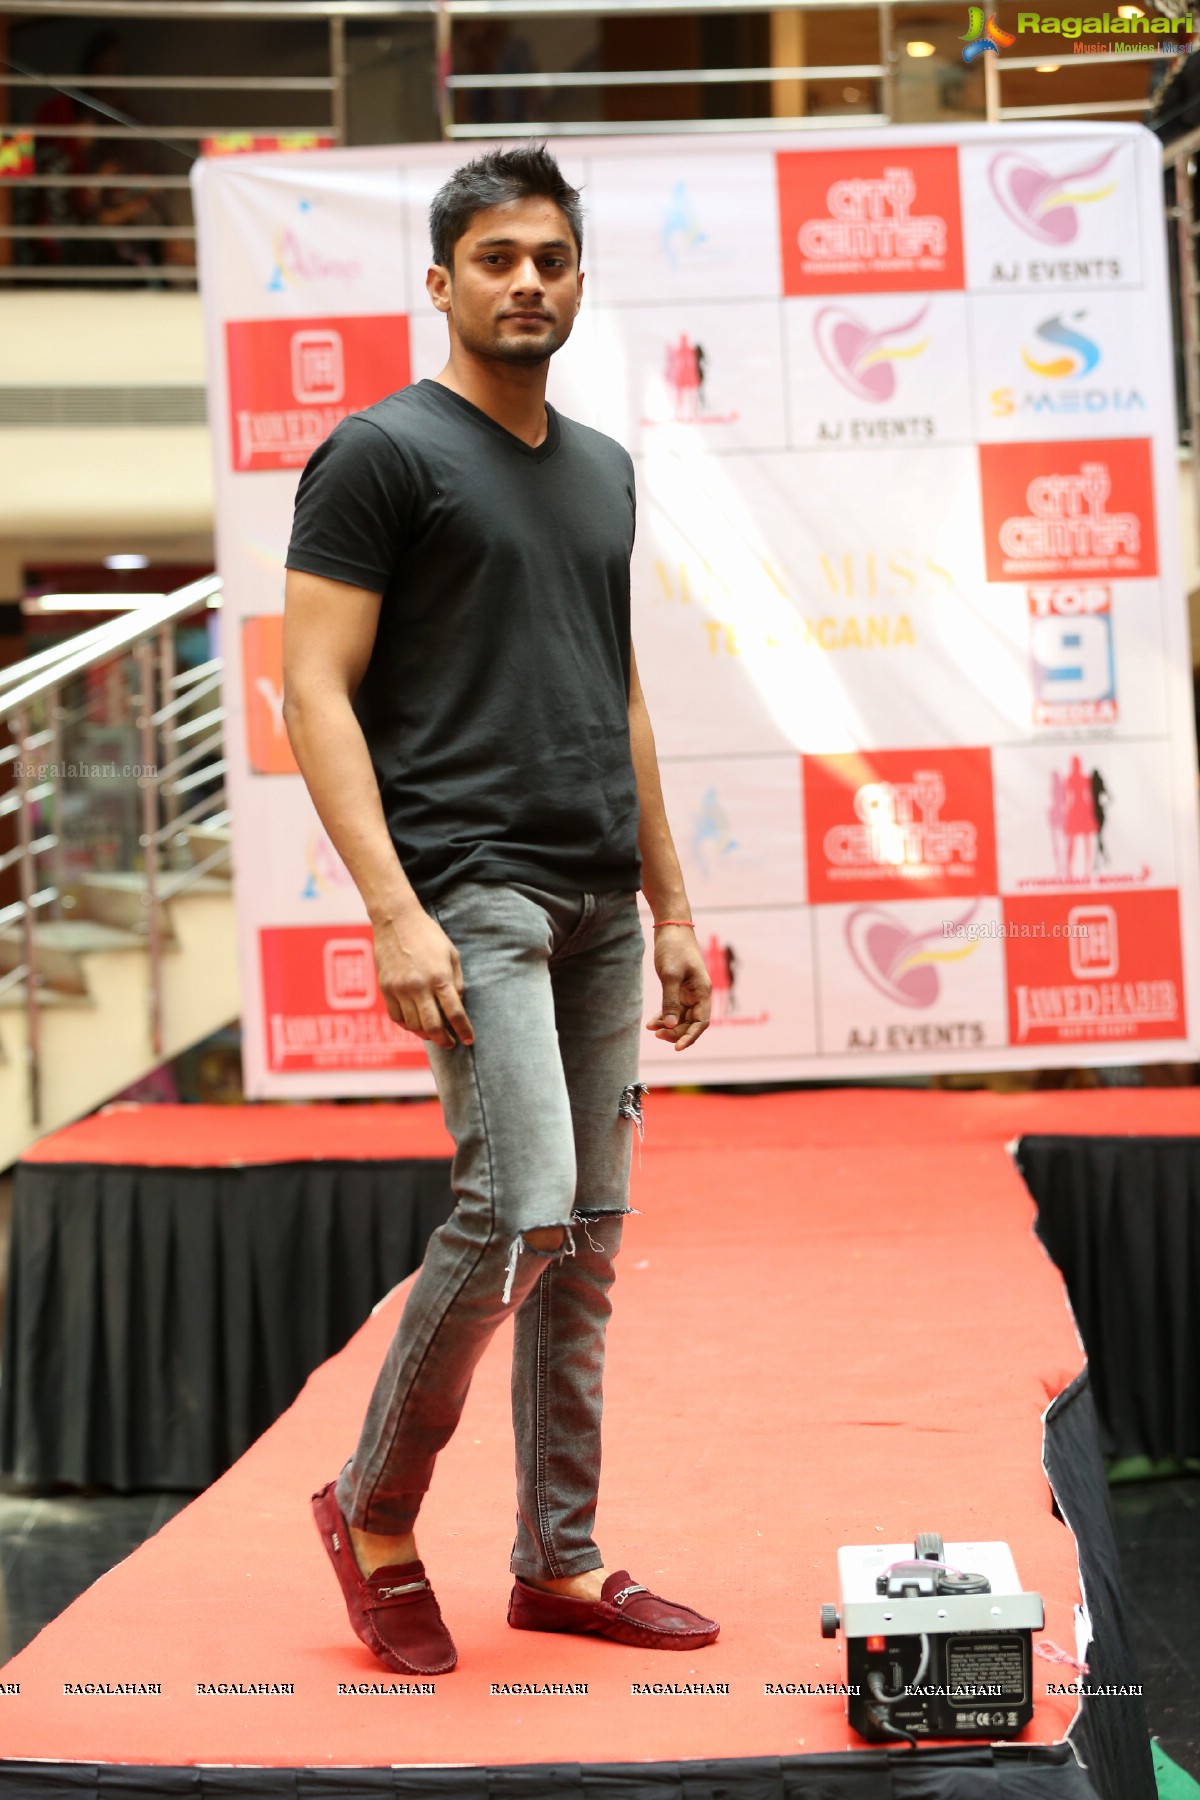 Mr and Miss Telangana Auditions 2018 Finals at City Center Mall, Hyderabad